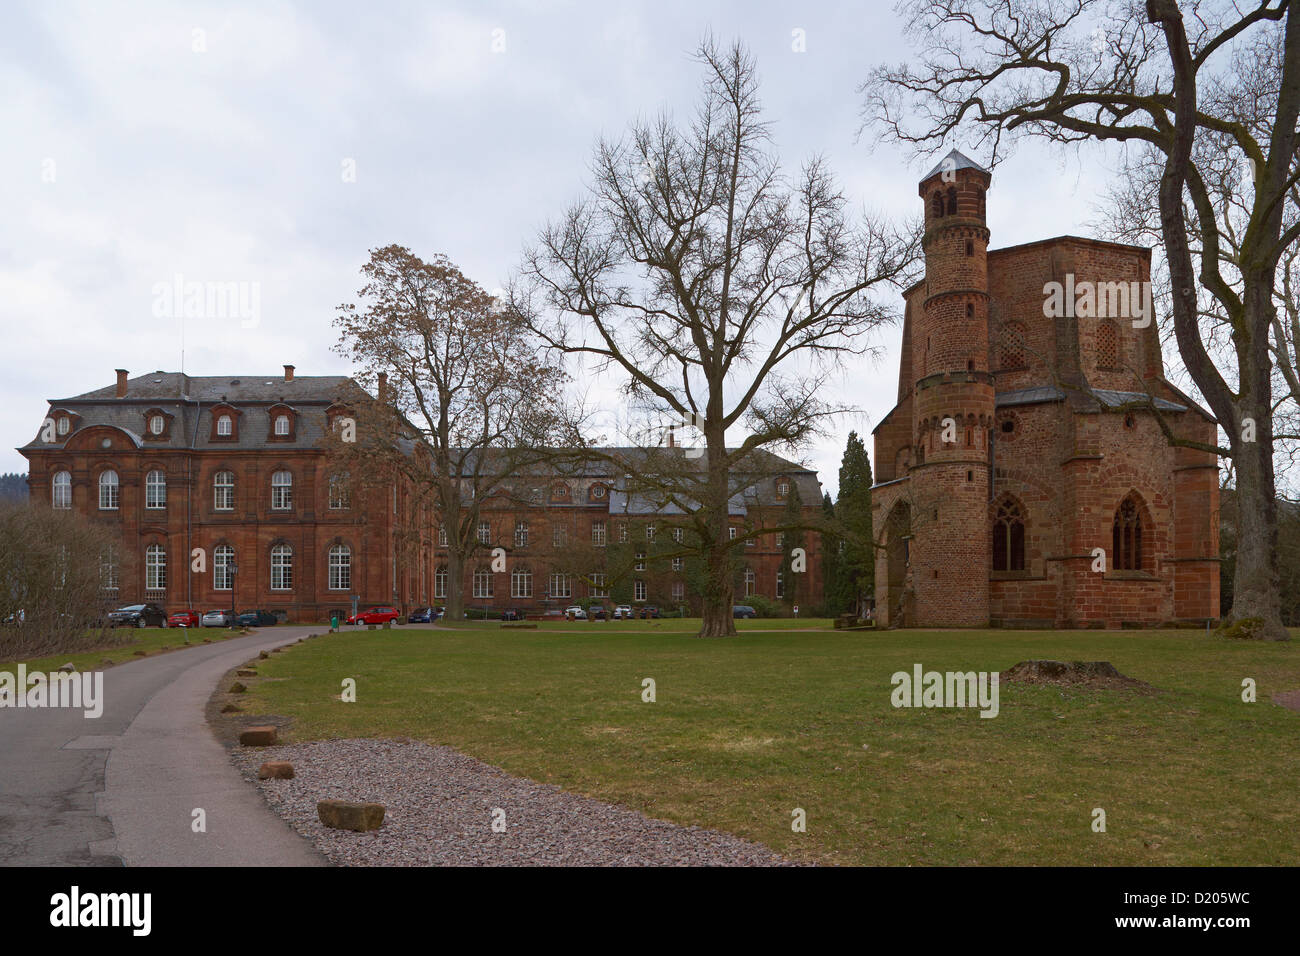 Old tower and old abbey in the park, adventure center Villeroy &amp; Boch, Mettlach, Saarland, Germany, Europe Stock Photo